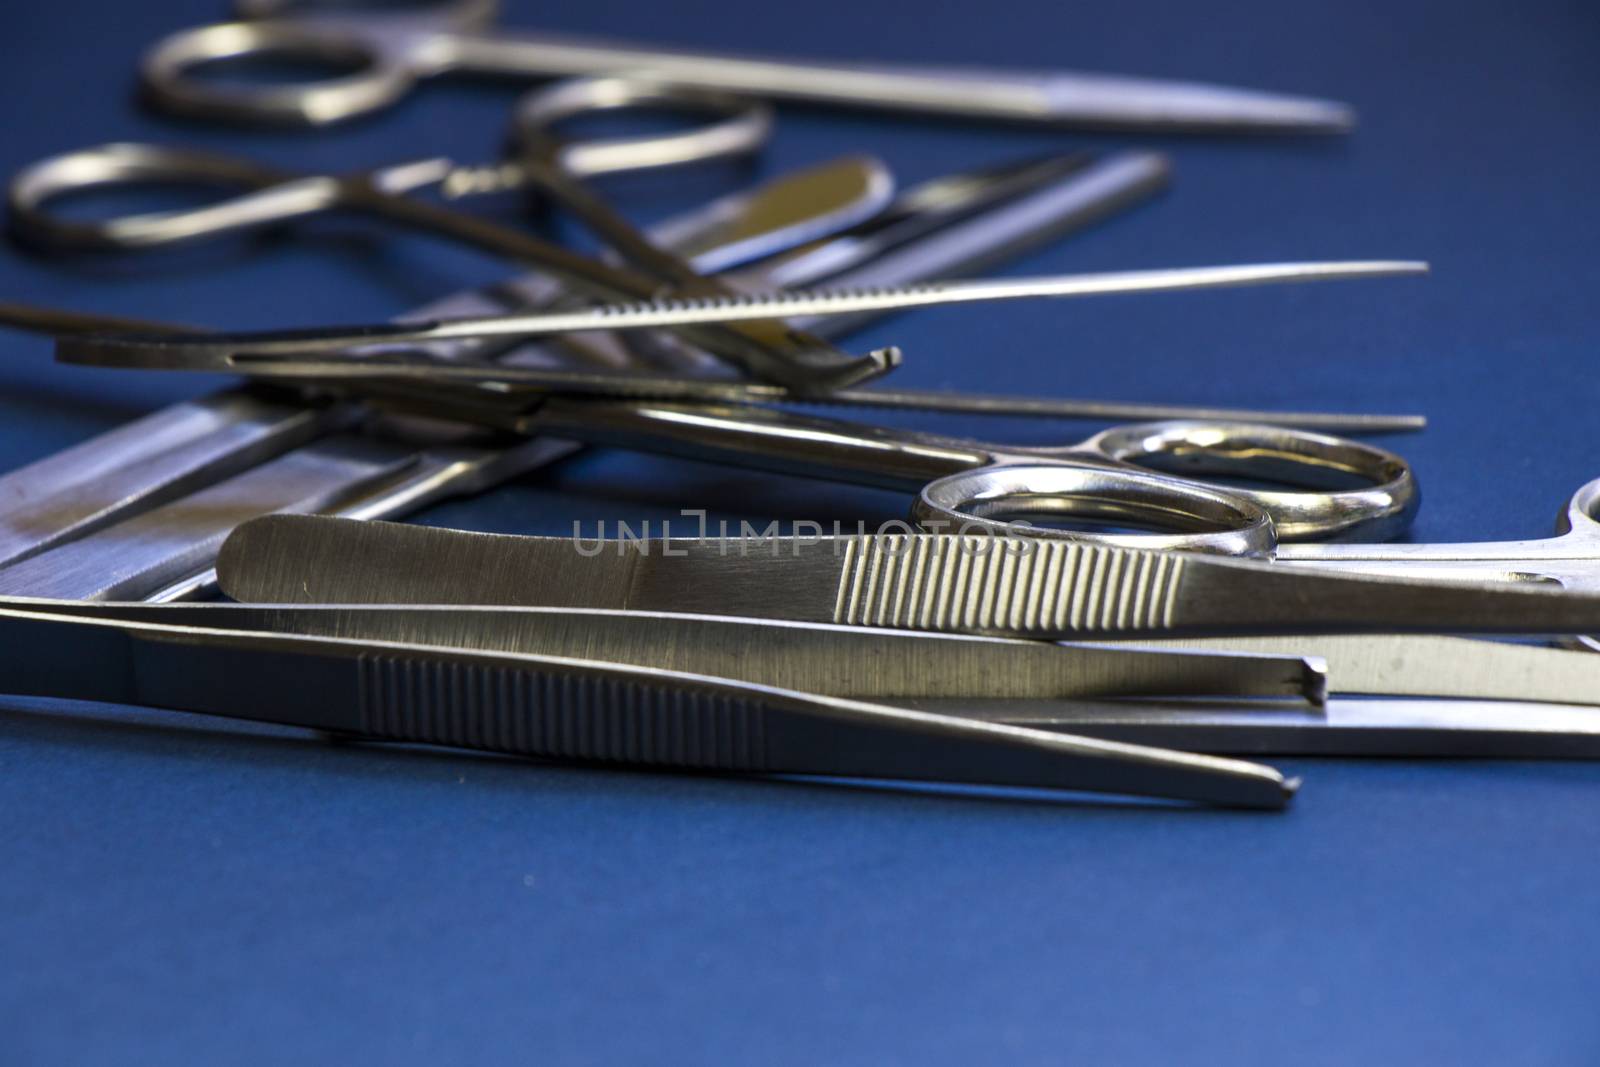 Dissection Kit - Premium Quality Stainless Steel Tools for Medical Students by Taidundua